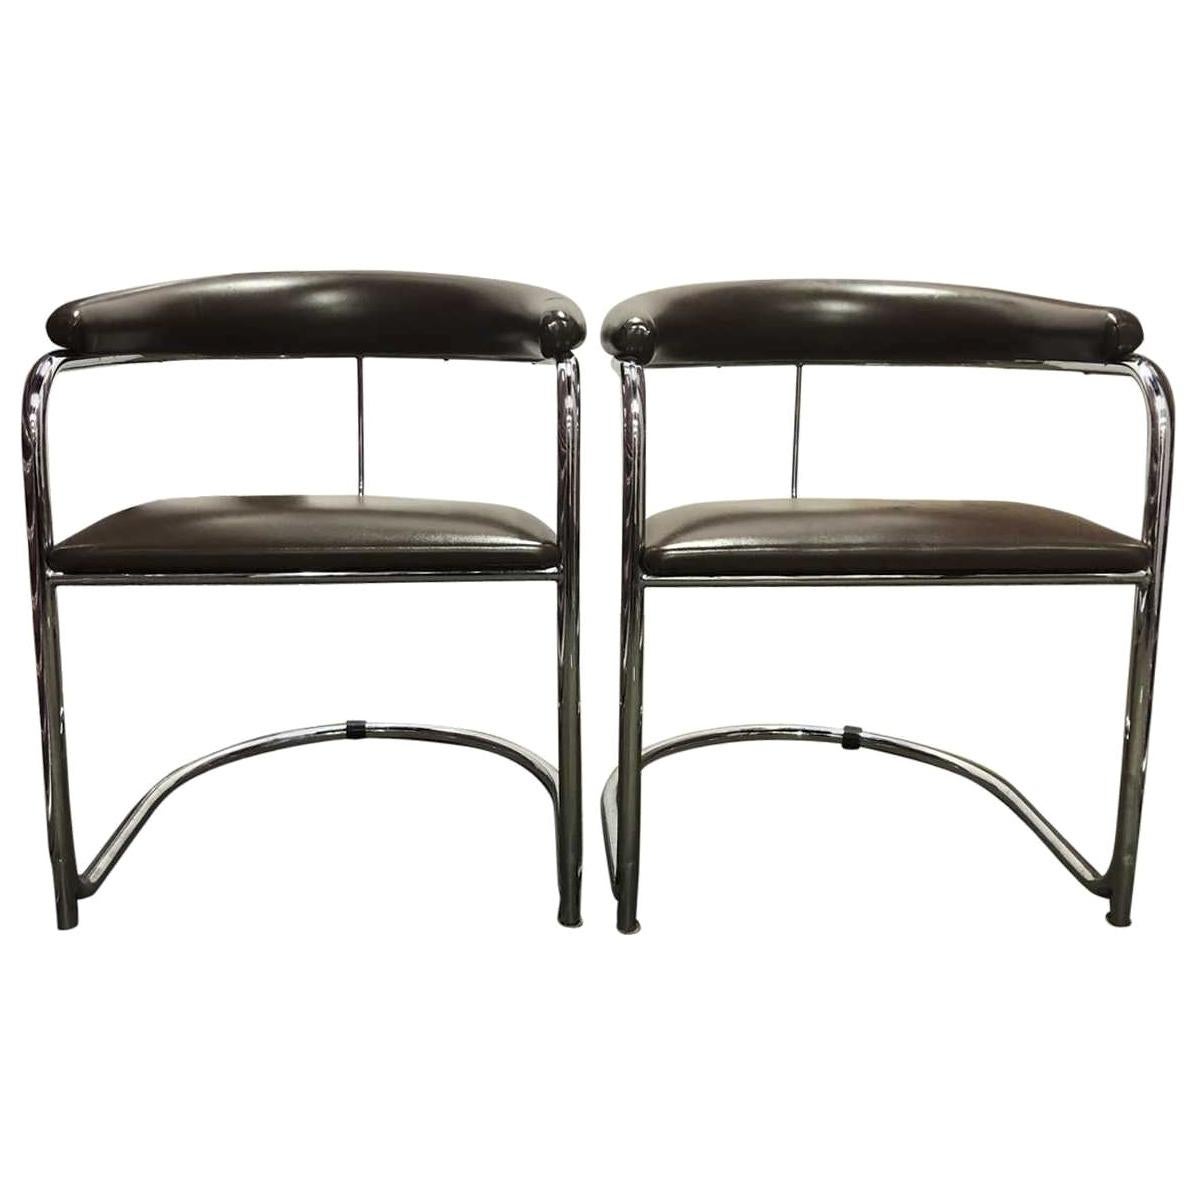 Pair of Cantilever Armchairs by Anton Lorenz